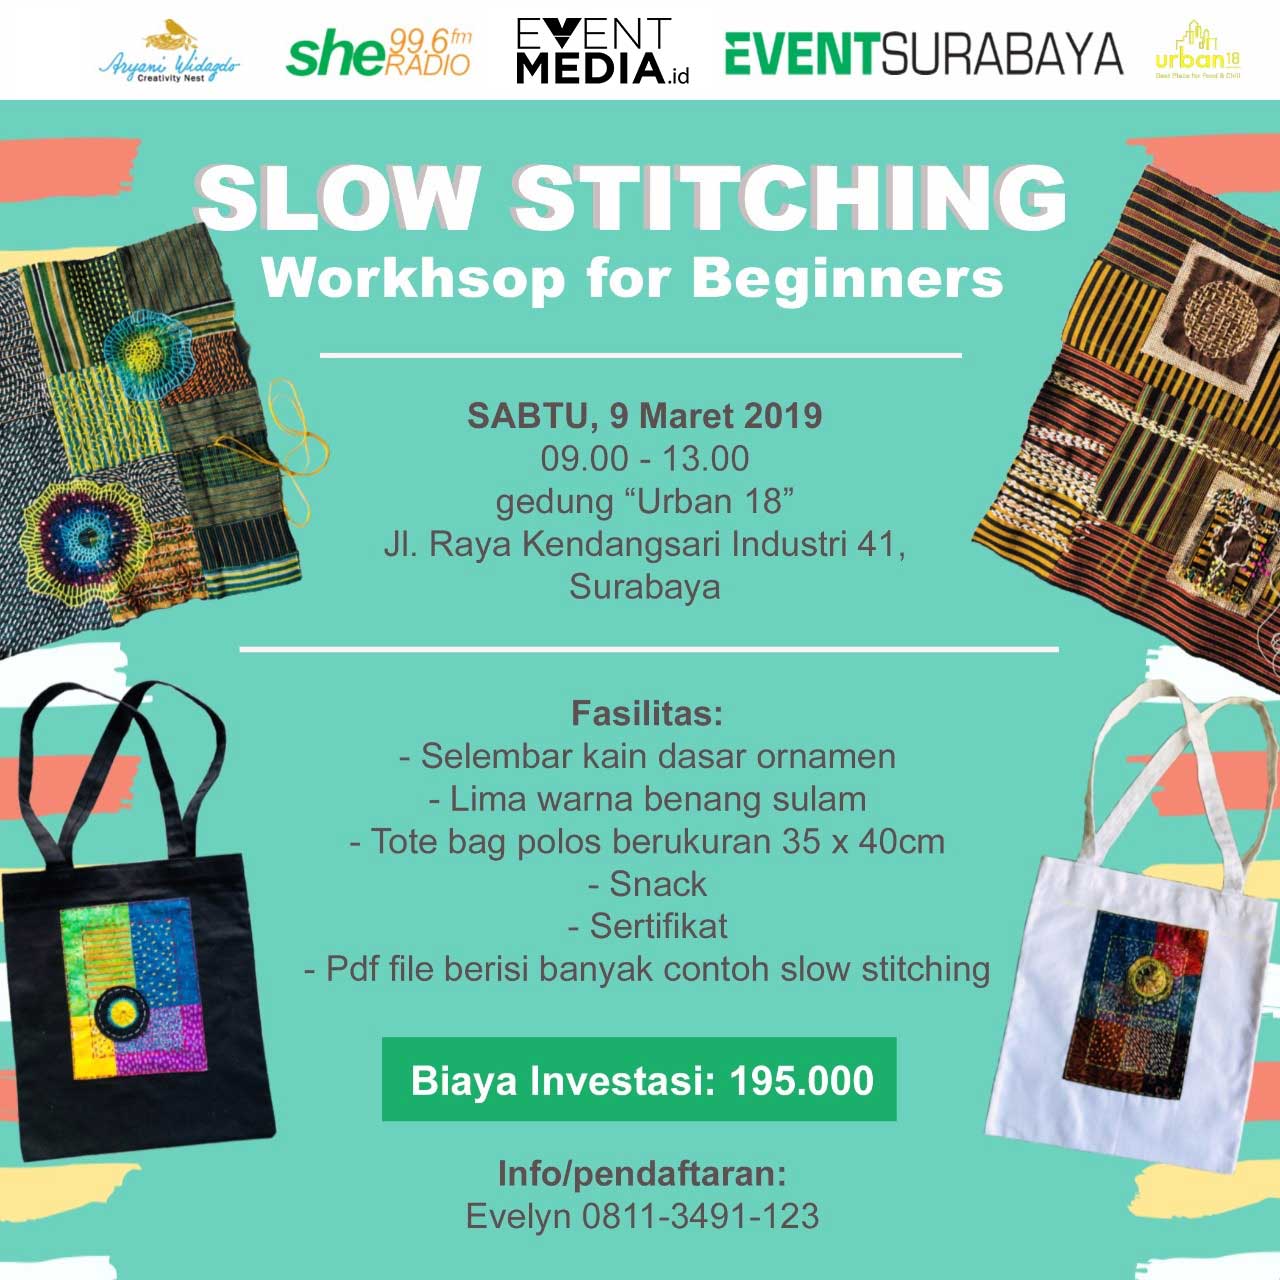 &#8220;SLOW STITCHING FOR BEGINNERS&#8221; Workshop